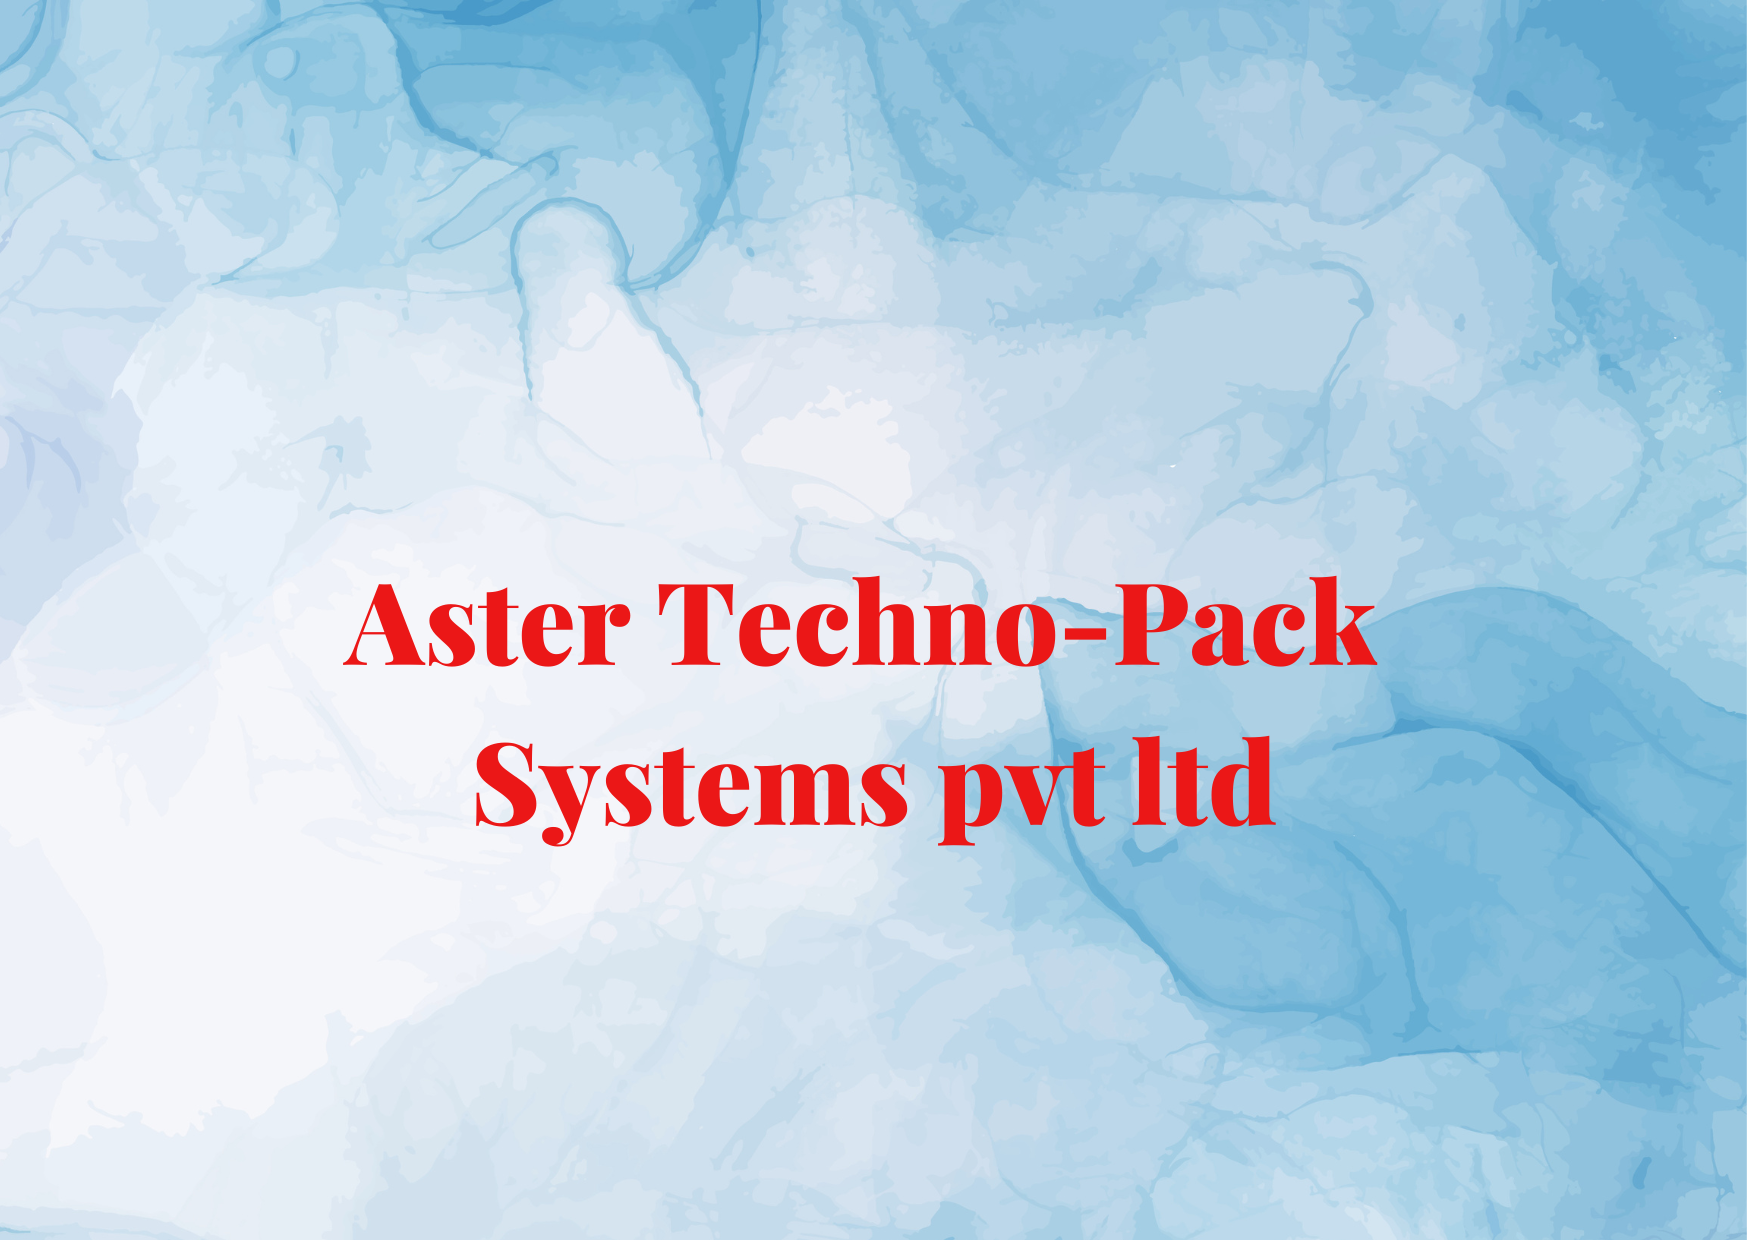 Aster Techno-Pack Systems pvt ltd,   